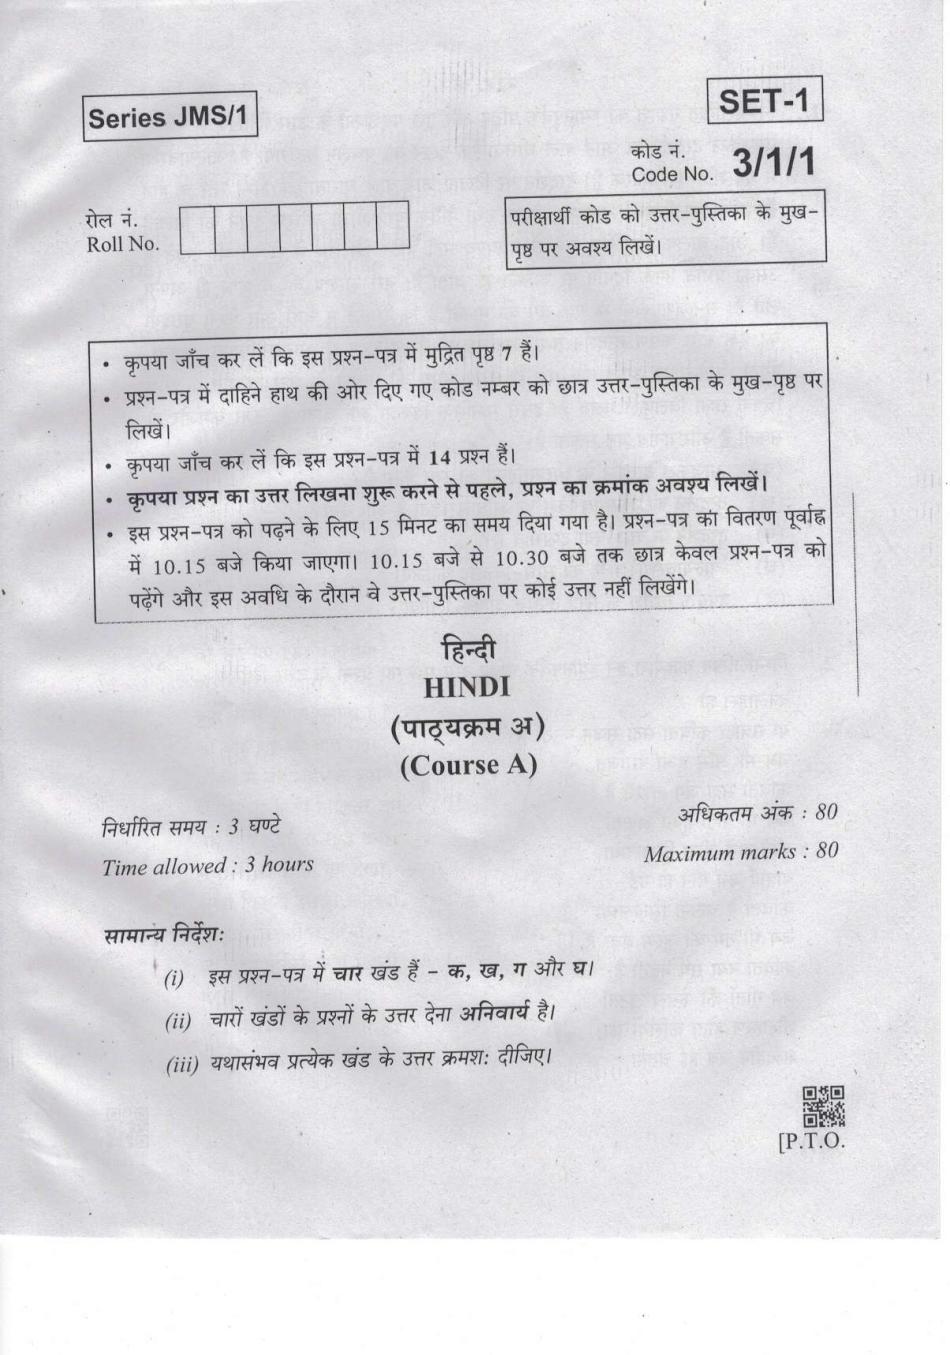 CBSE Class 10 Hindi Course A Question Paper 2019 Set 1 - Page 1